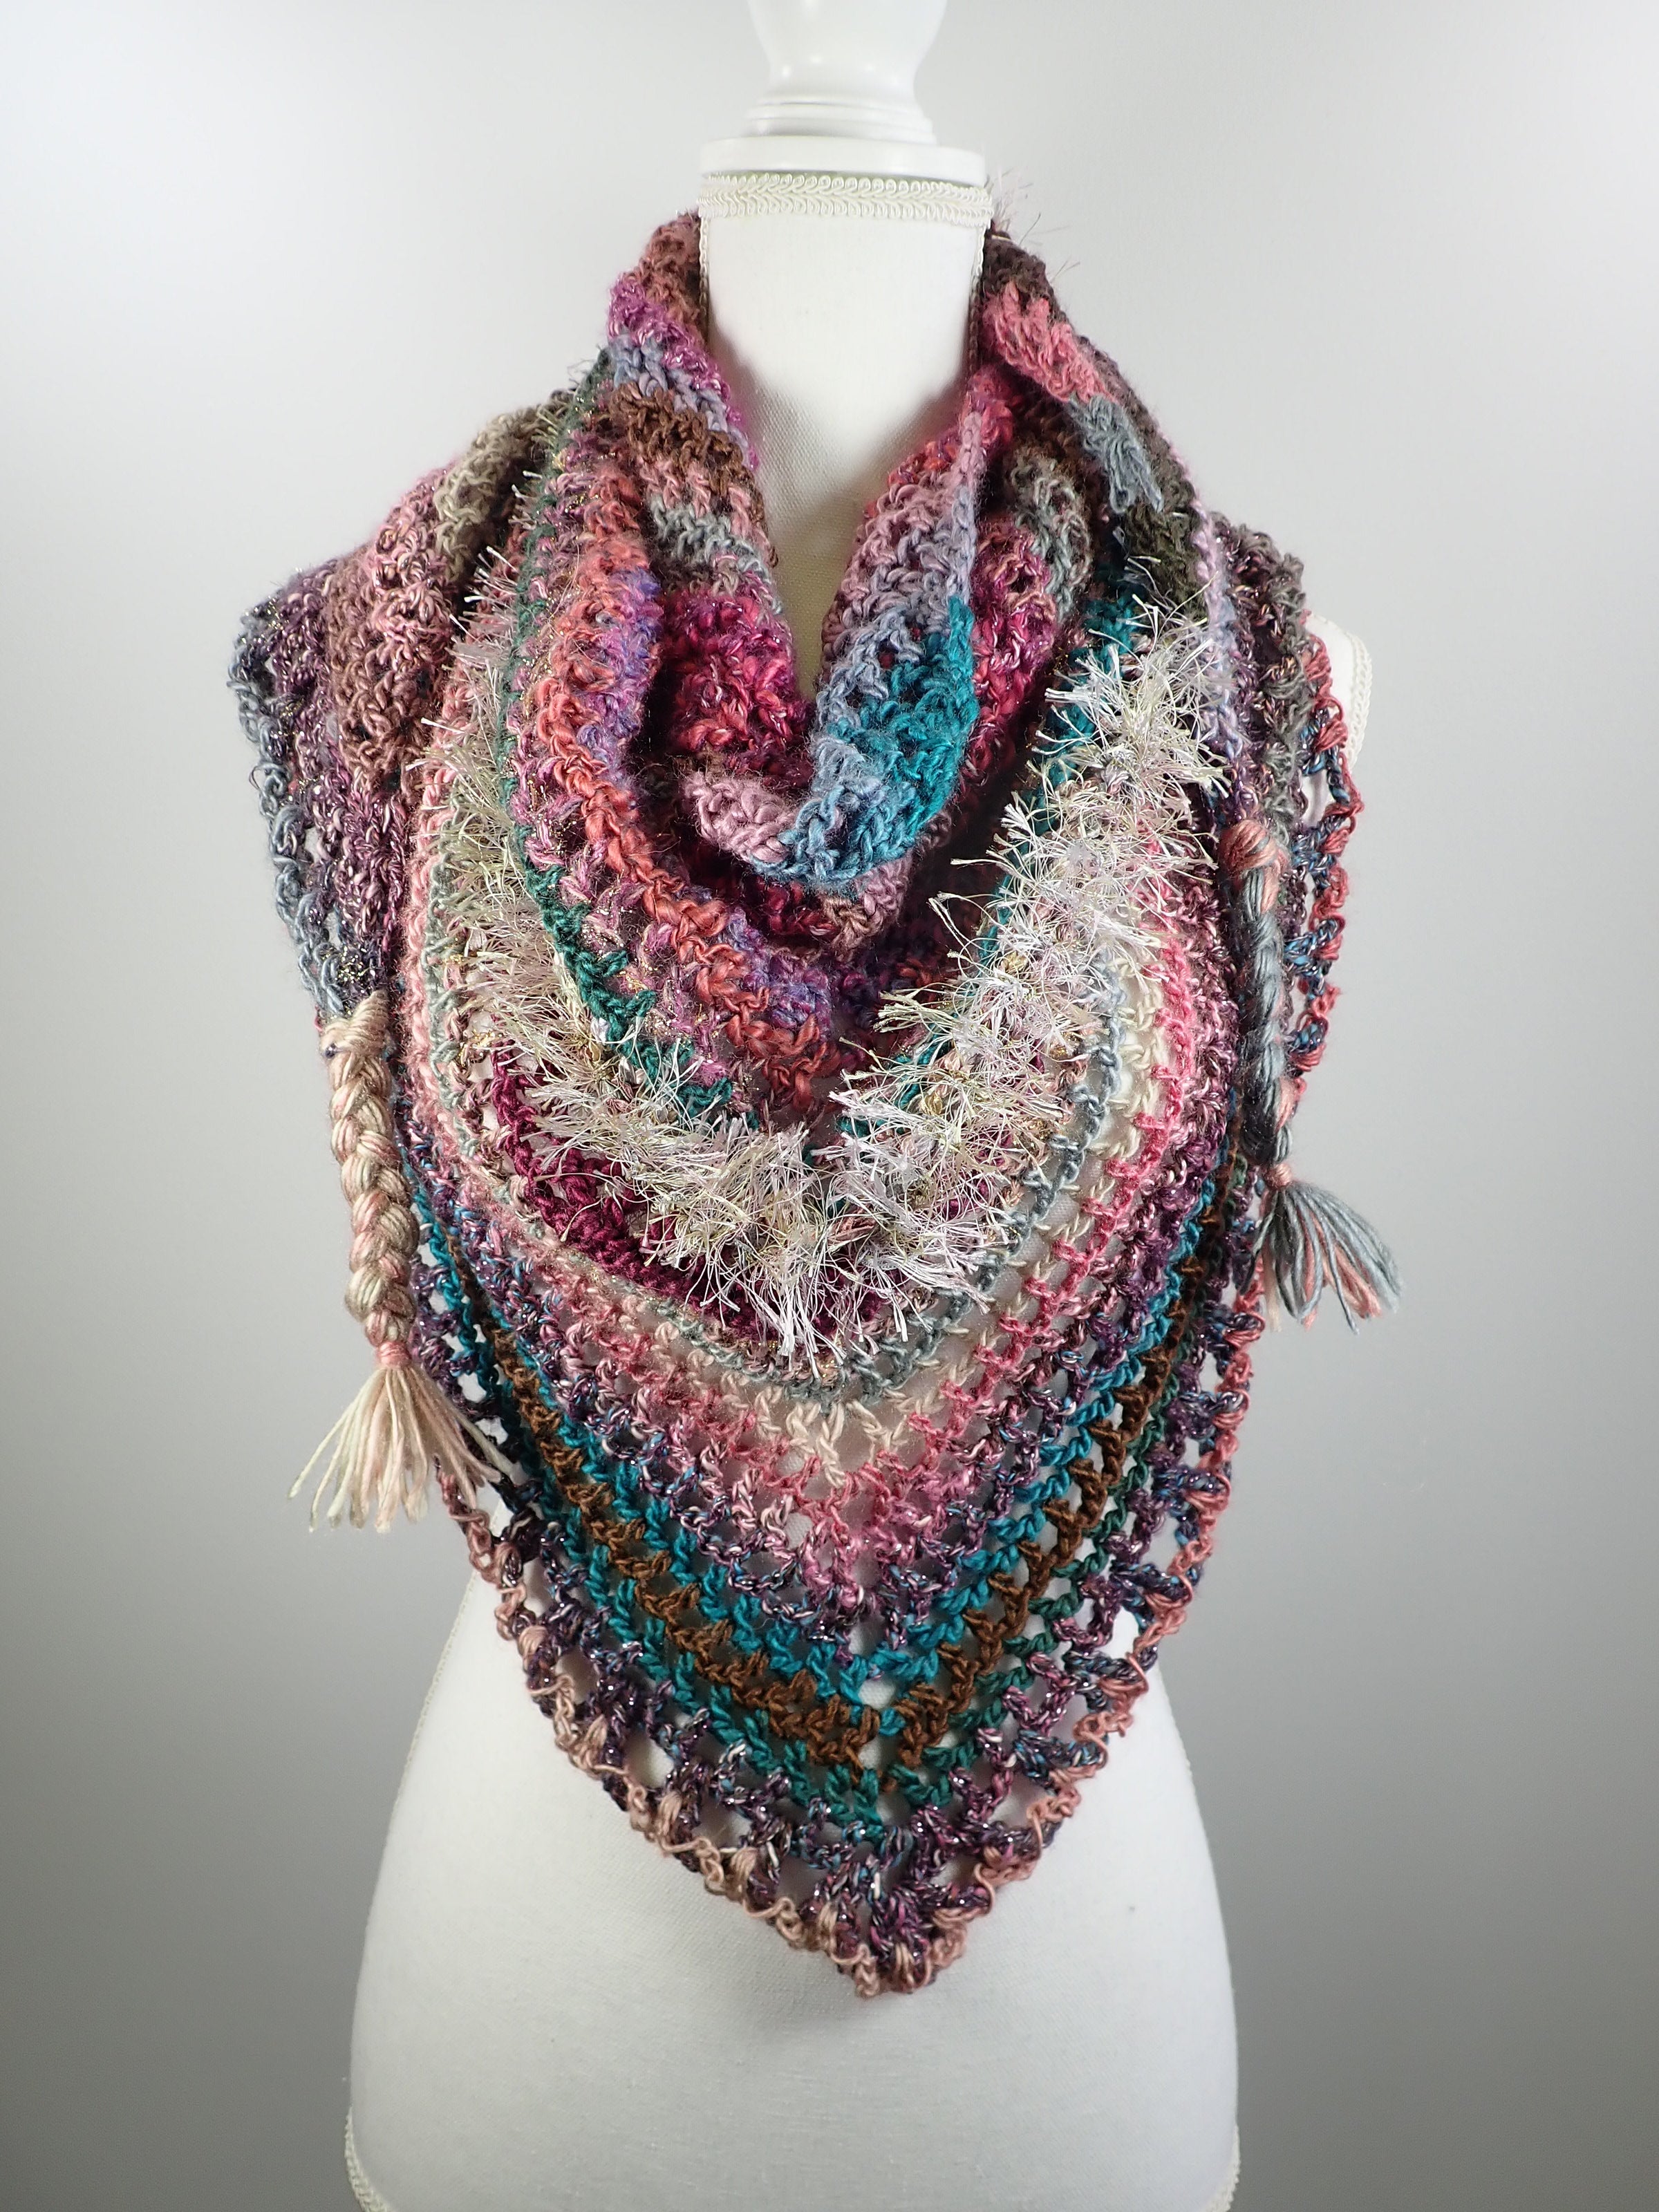 Handmade triangle scarf in many colors for women